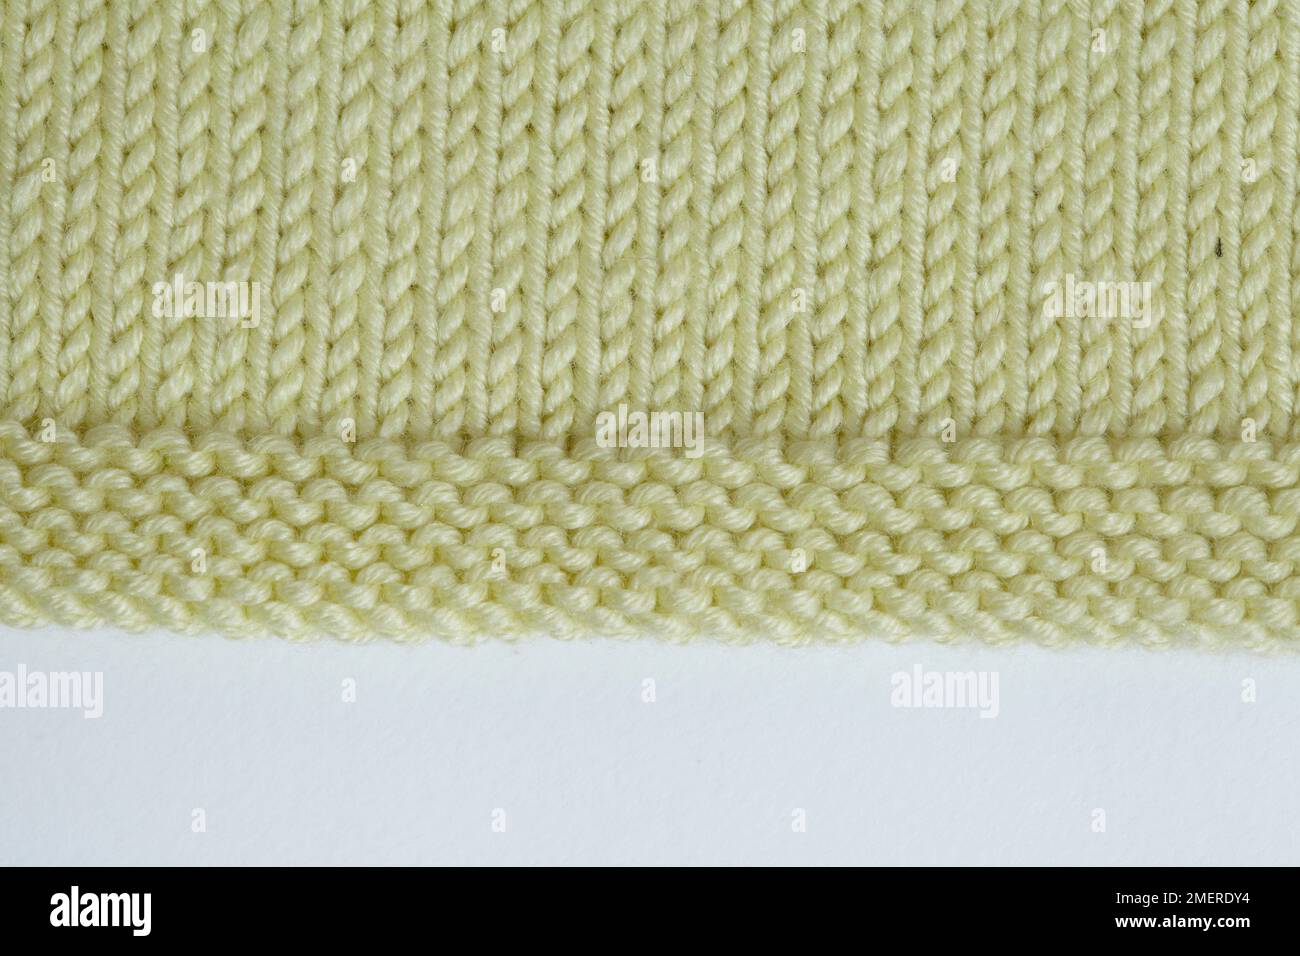 Close up of knitted hoodie Stock Photo